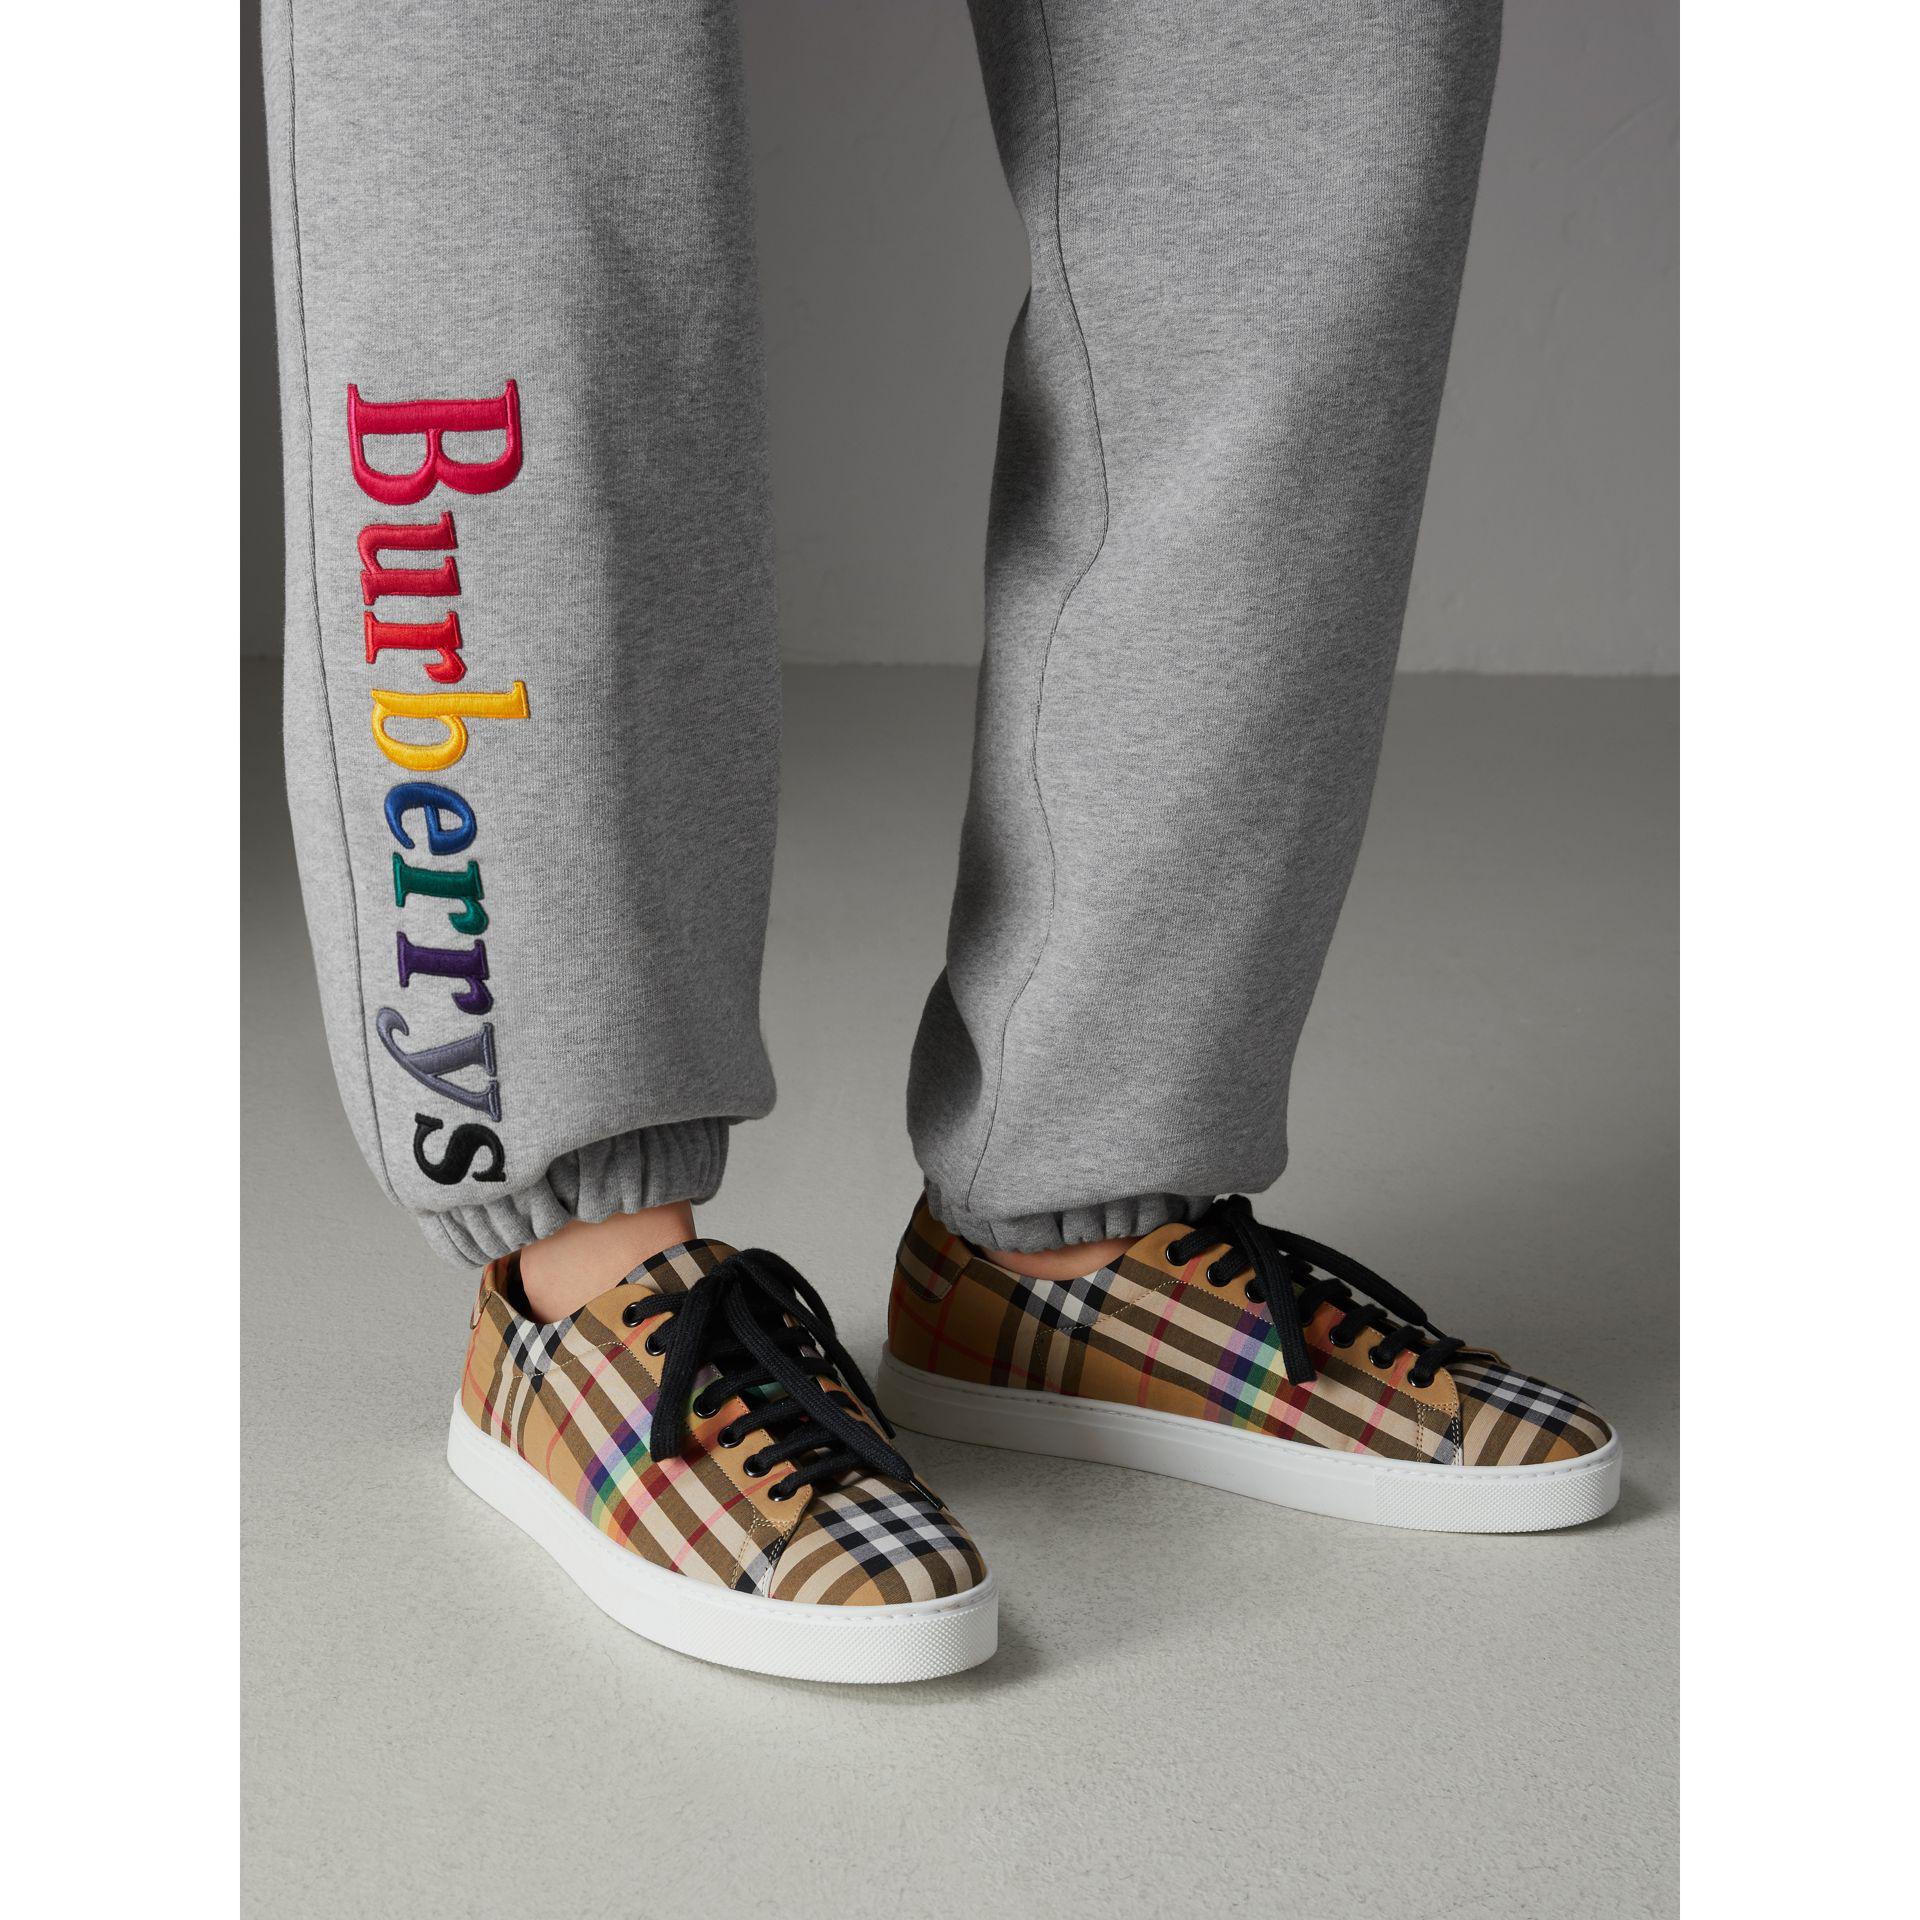 burberry rainbow vintage check sneakers